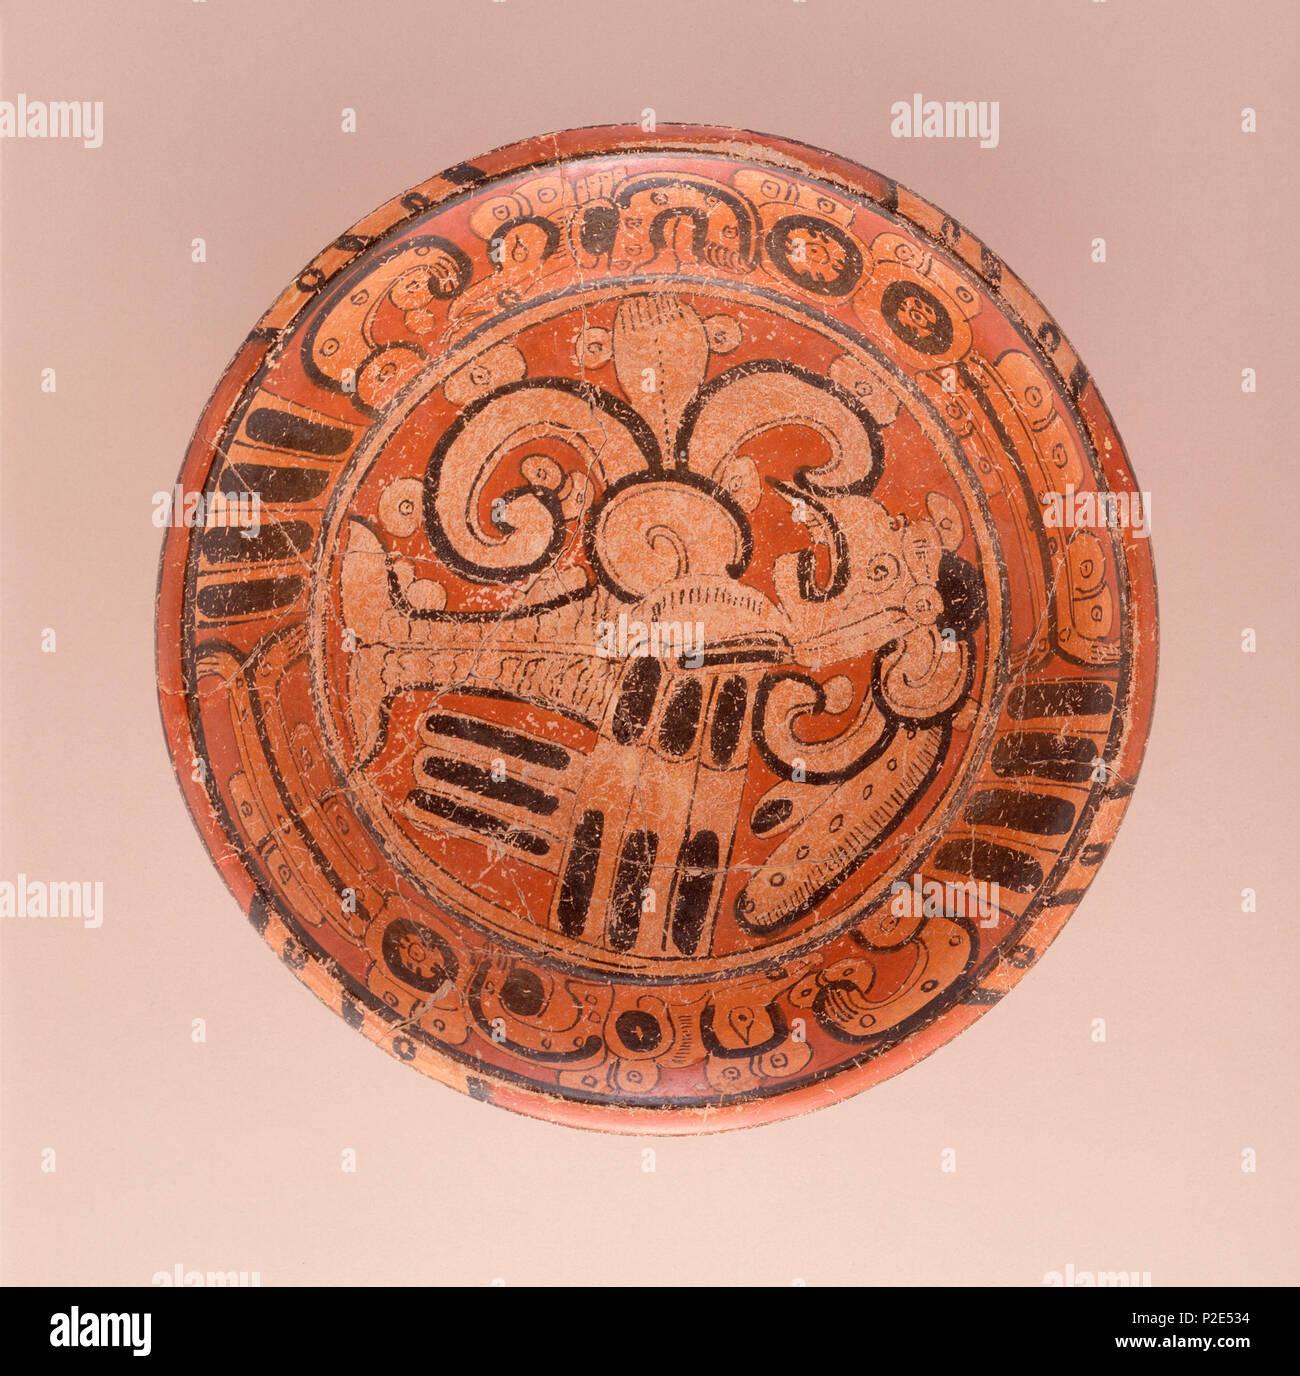 English: Mexico, Northern Campeche, Maya Tripod Plate with Mythological  Bird, A.D. 550-700 Ceramic, Slip-painted ceramic, Diameter: 14 in. (35.6  cm) Gift of the Art Museum Council in honor of the museum's